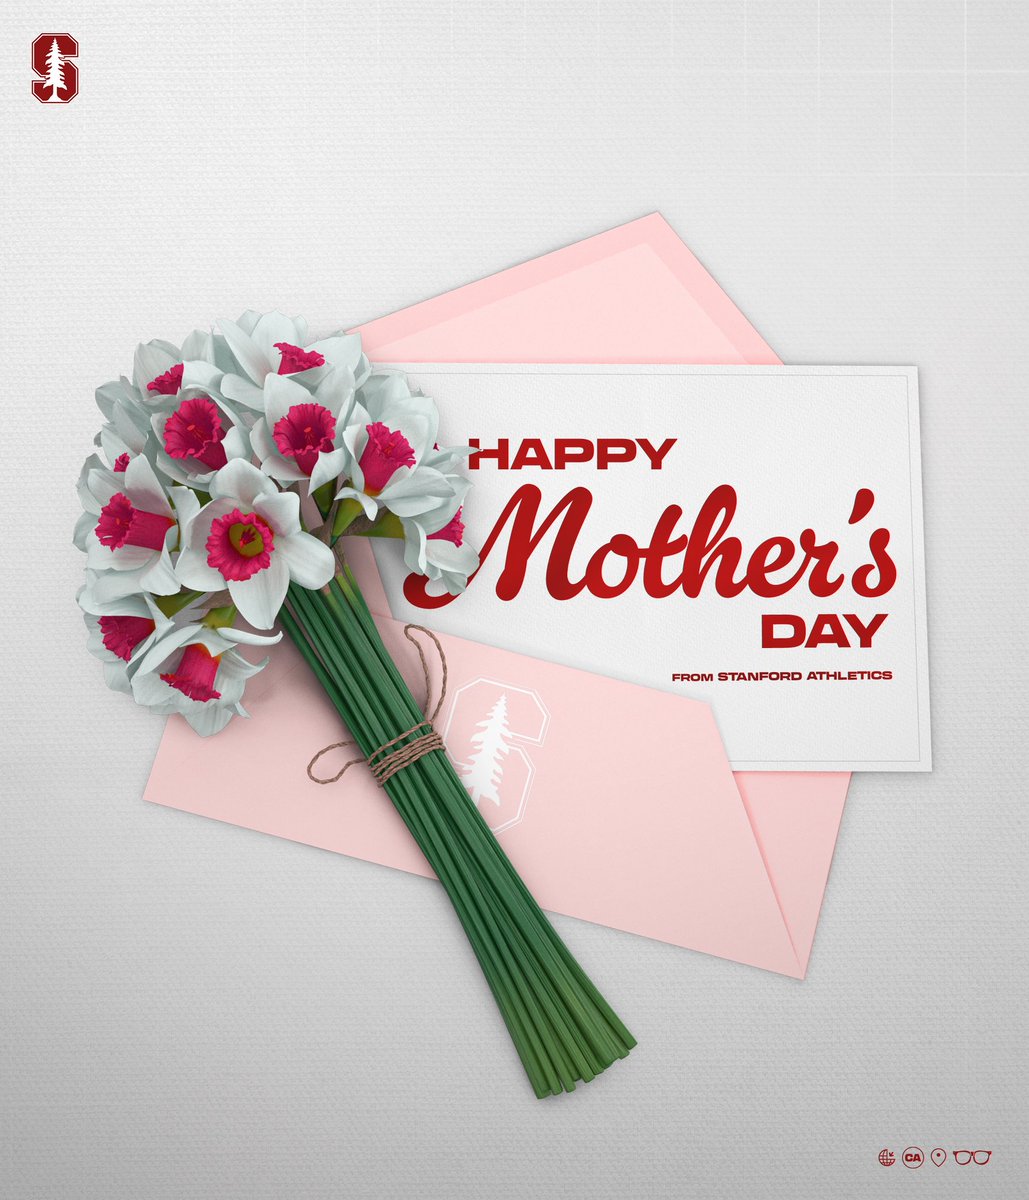 Sending our best to the Card moms today!